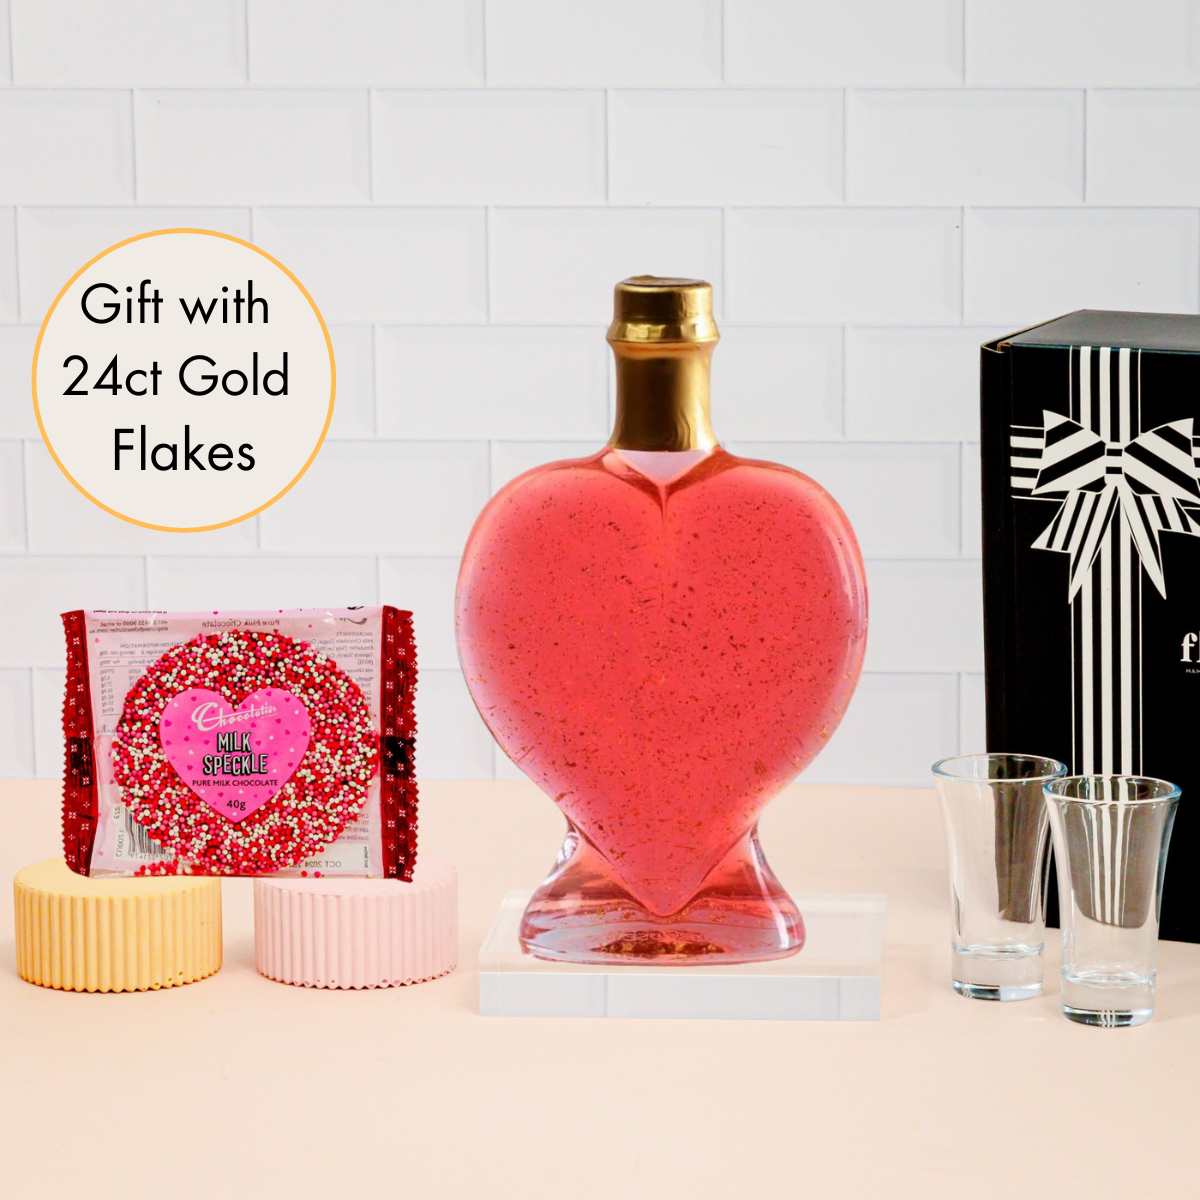 Love Heart Bottle - Raspberry Liqueur 24ct Gold Flakes and Freckle Choc - Gift Box